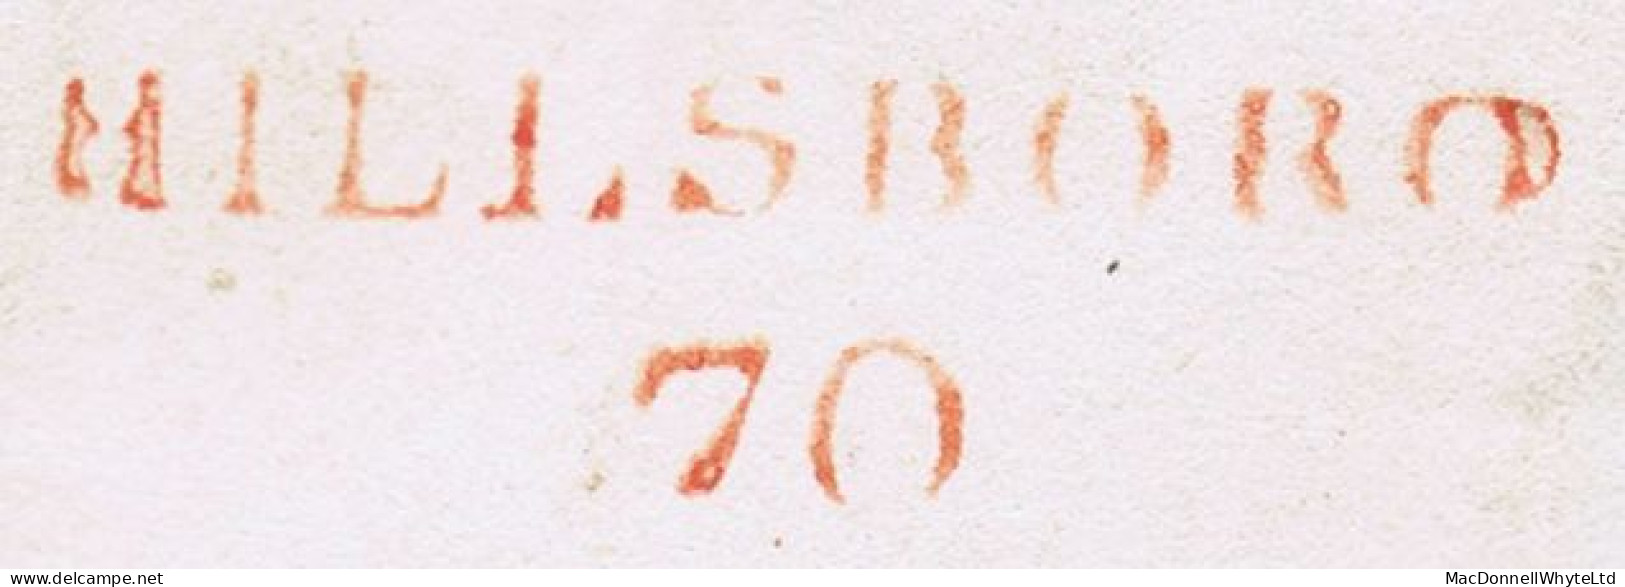 Ireland Down 1832 Masonic Cover To Dublin "Haste9" With Hillsboro POST PAID (with Dot) And Matching HILLSBORO/70 Mileage - Prephilately